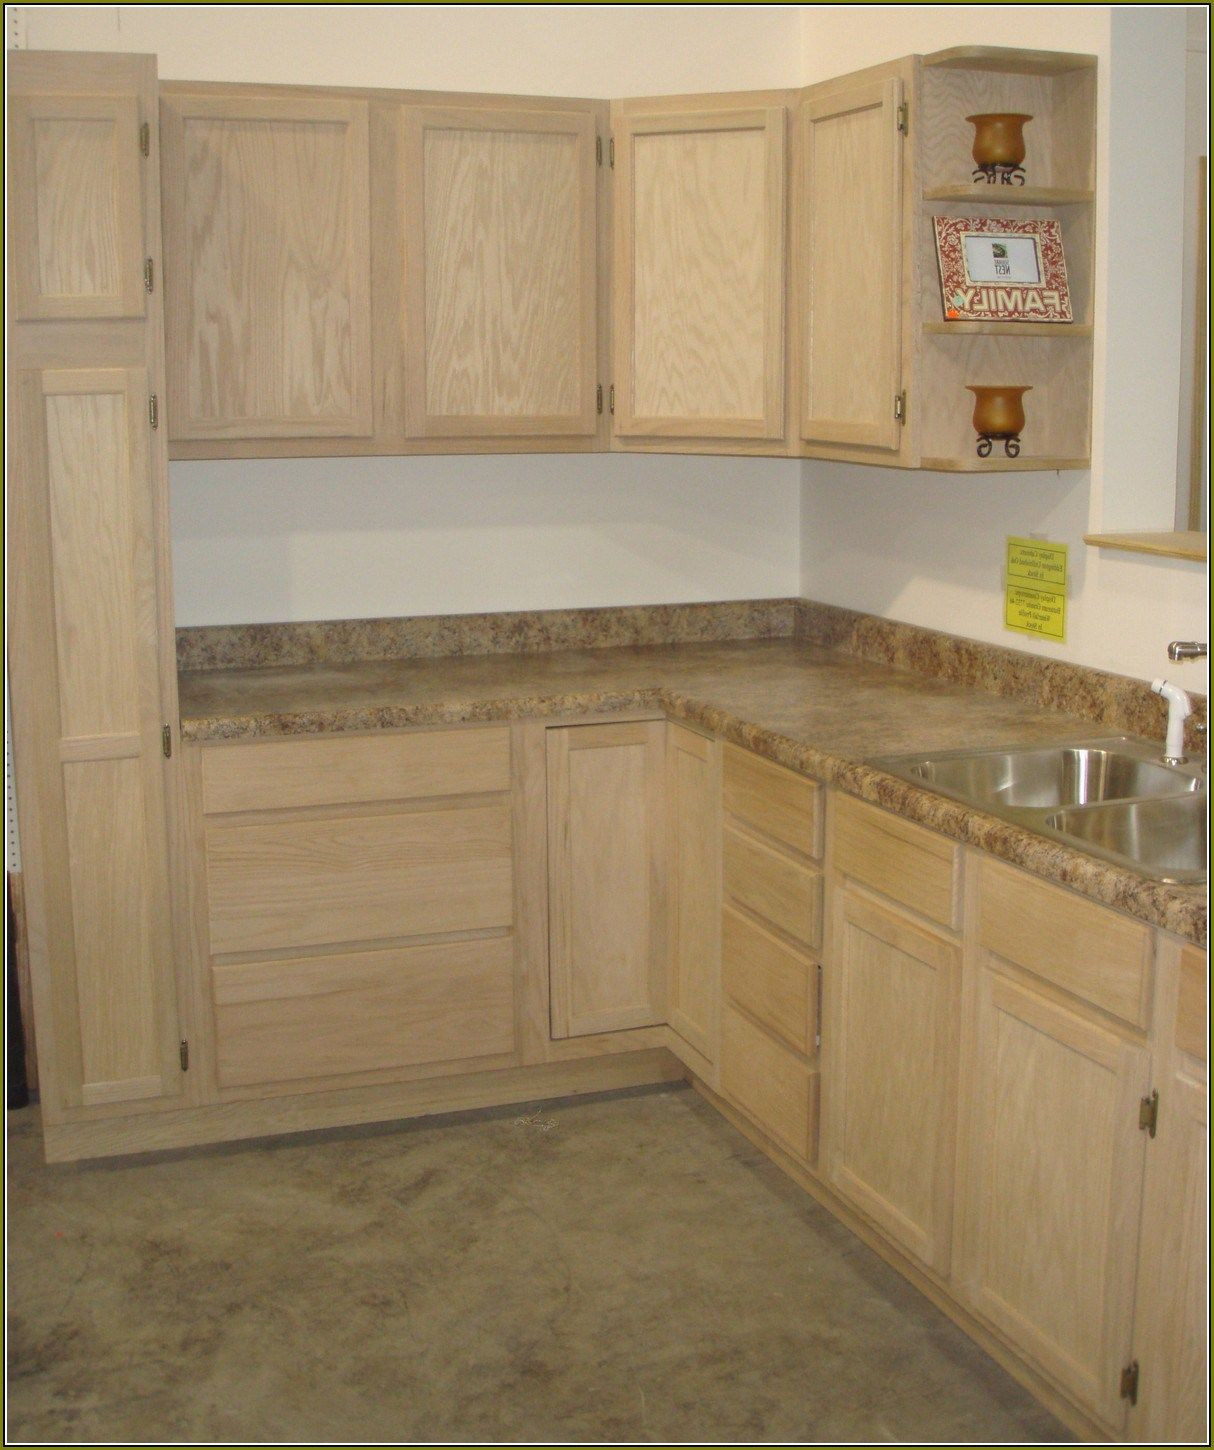 Home Depot Unfinished Kitchen Cabinets
 Home Improvements Refference Unfinished Pine Cabinets Home